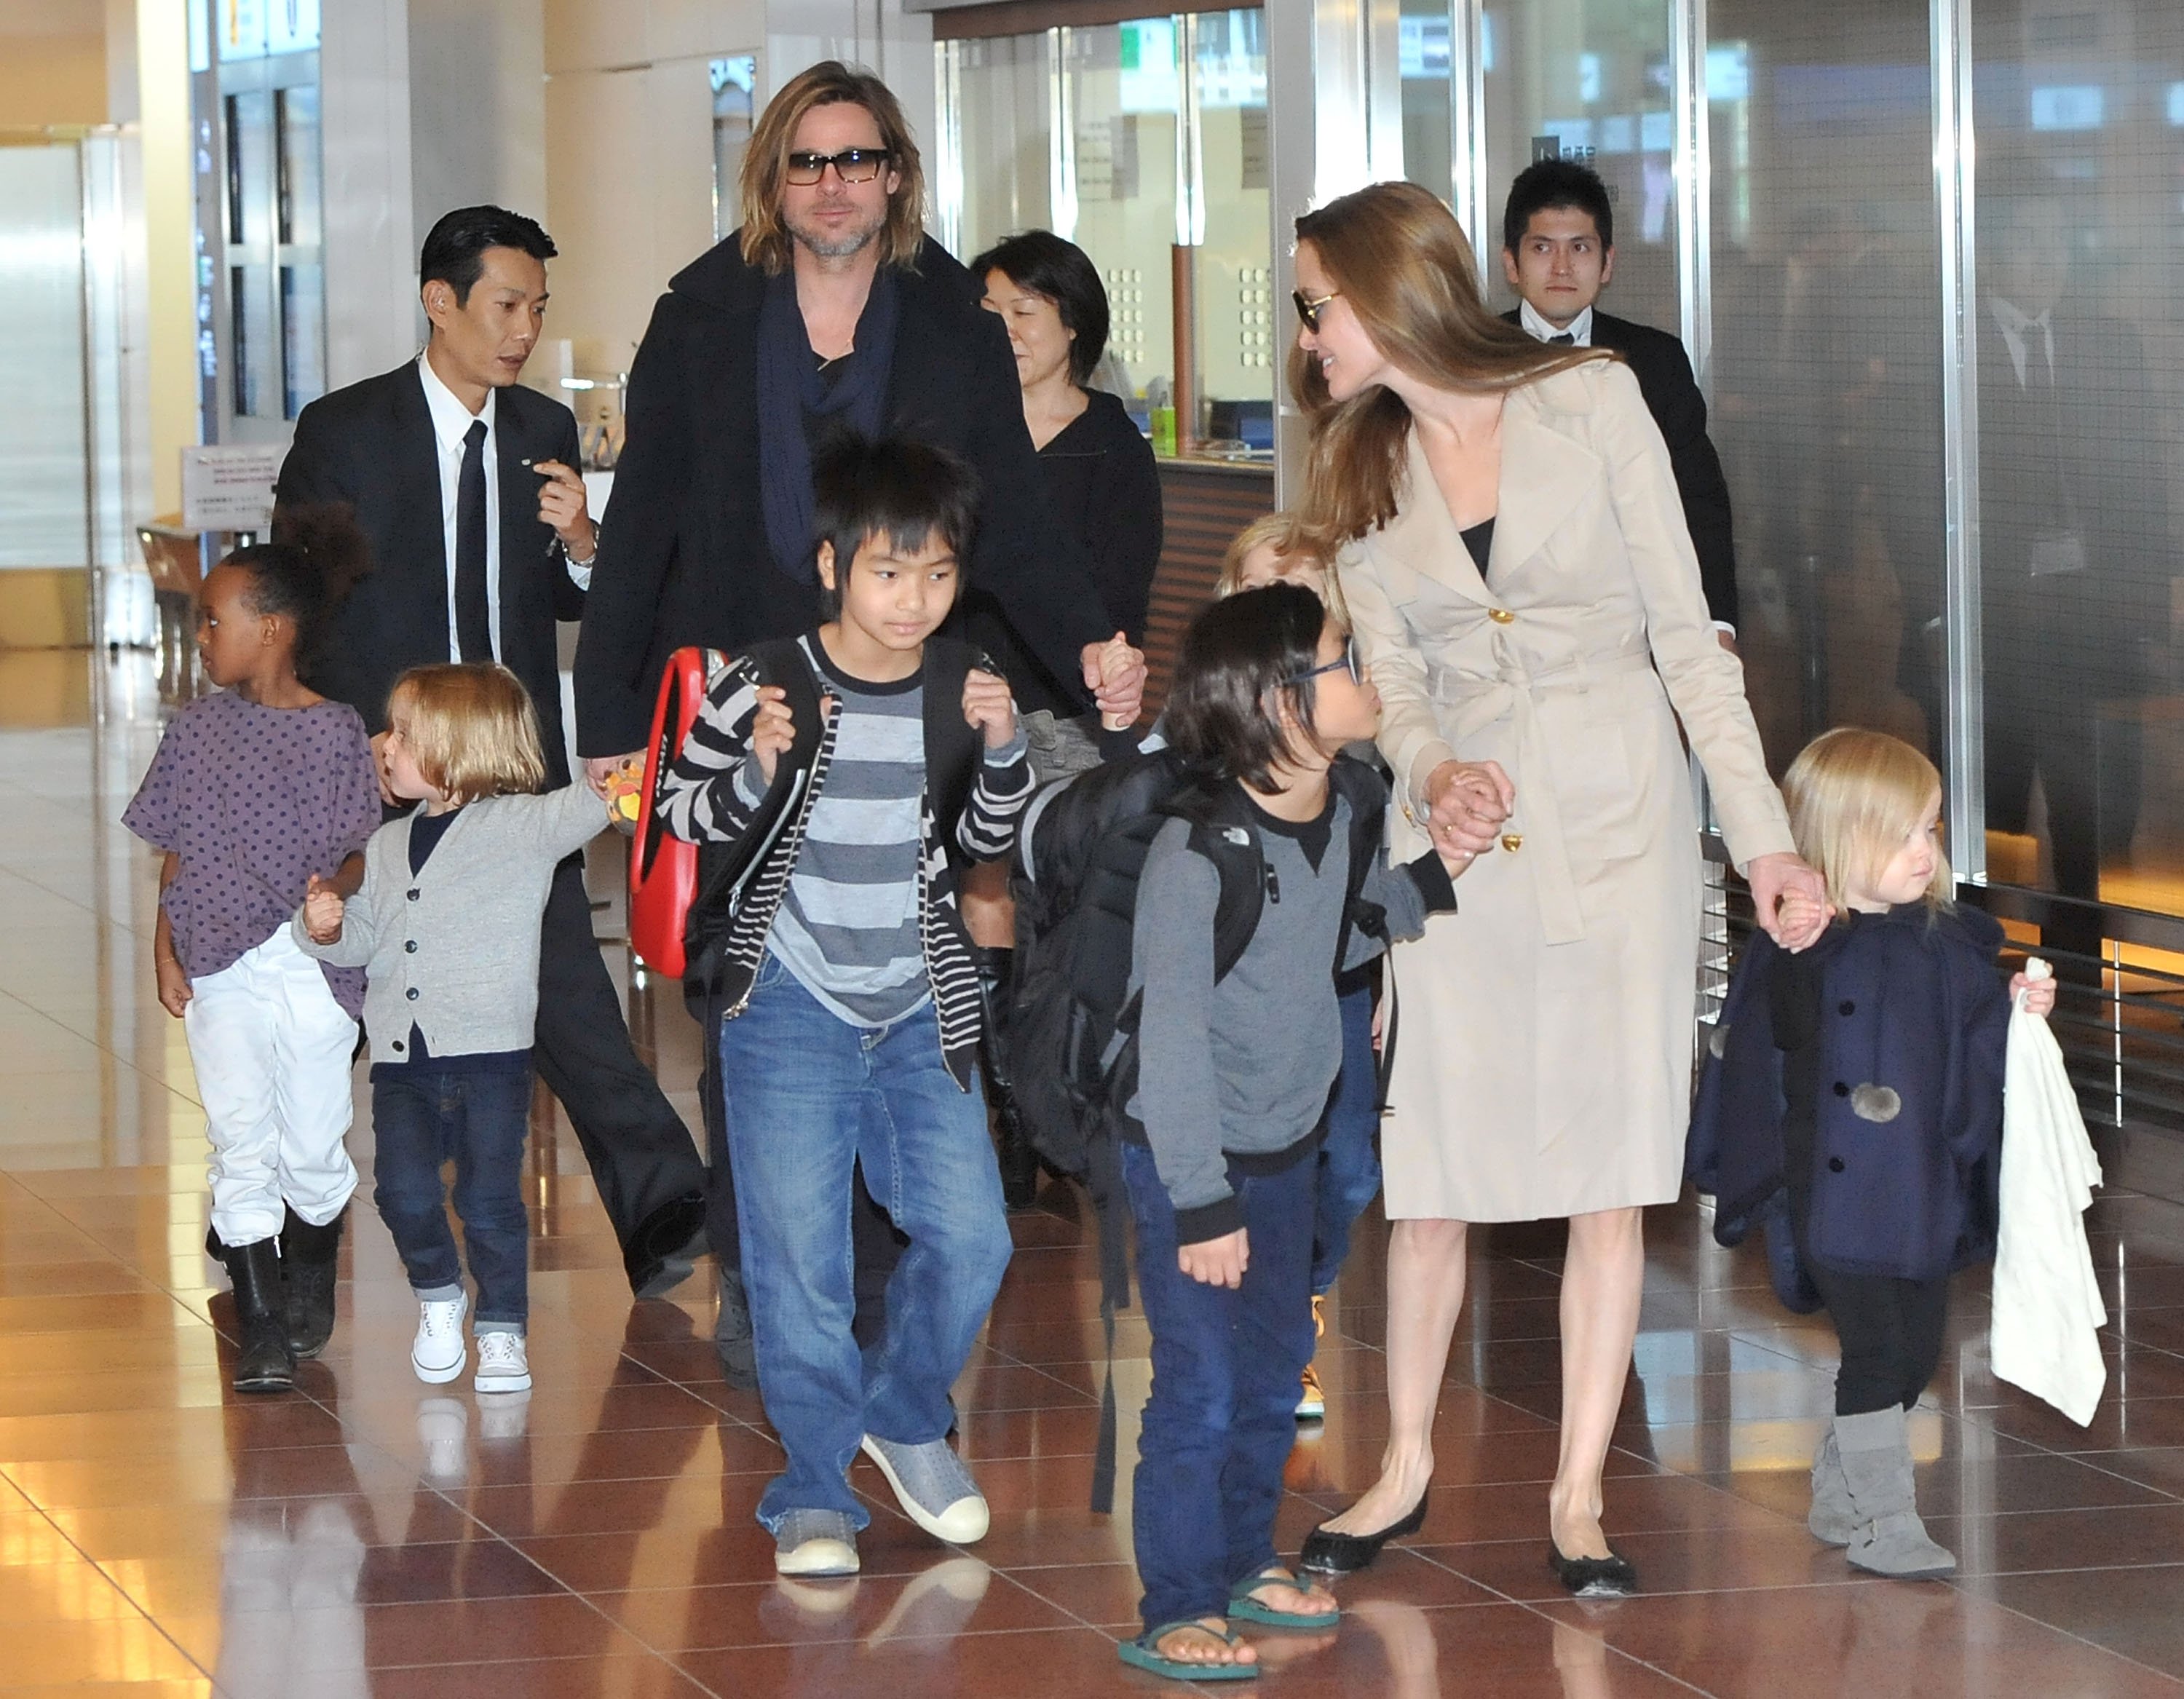 Brad Pitt, Angelina Jolie and their six children Maddox, Pax, Zahara, Shiloh, Knox, and Vivienne arrive at Haneda International Airport on November 8 in Tokyo, Japan | Source: Getty Images